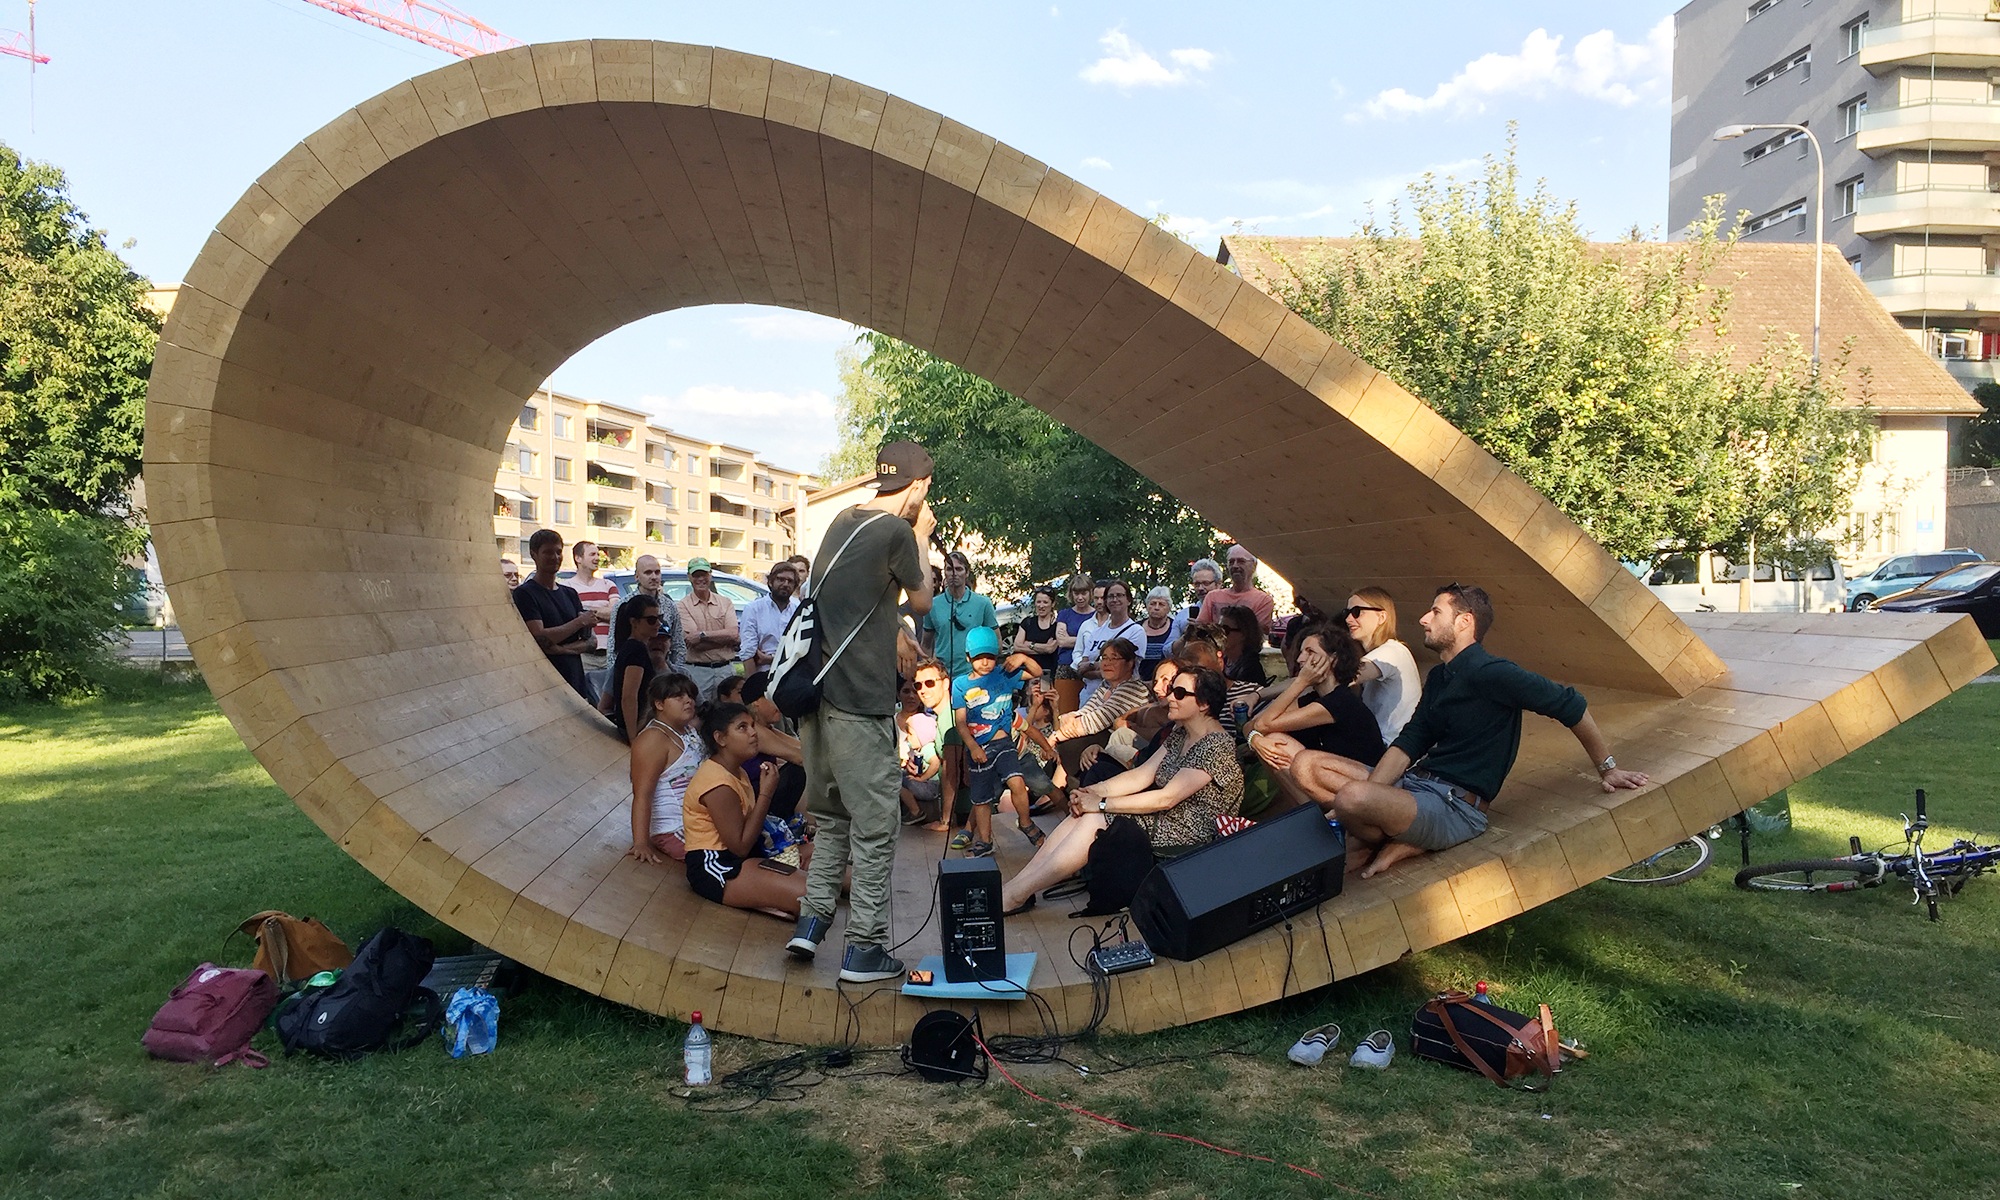 Many people sit or stand together in the sound pavilion, which is in the shape of a loop.